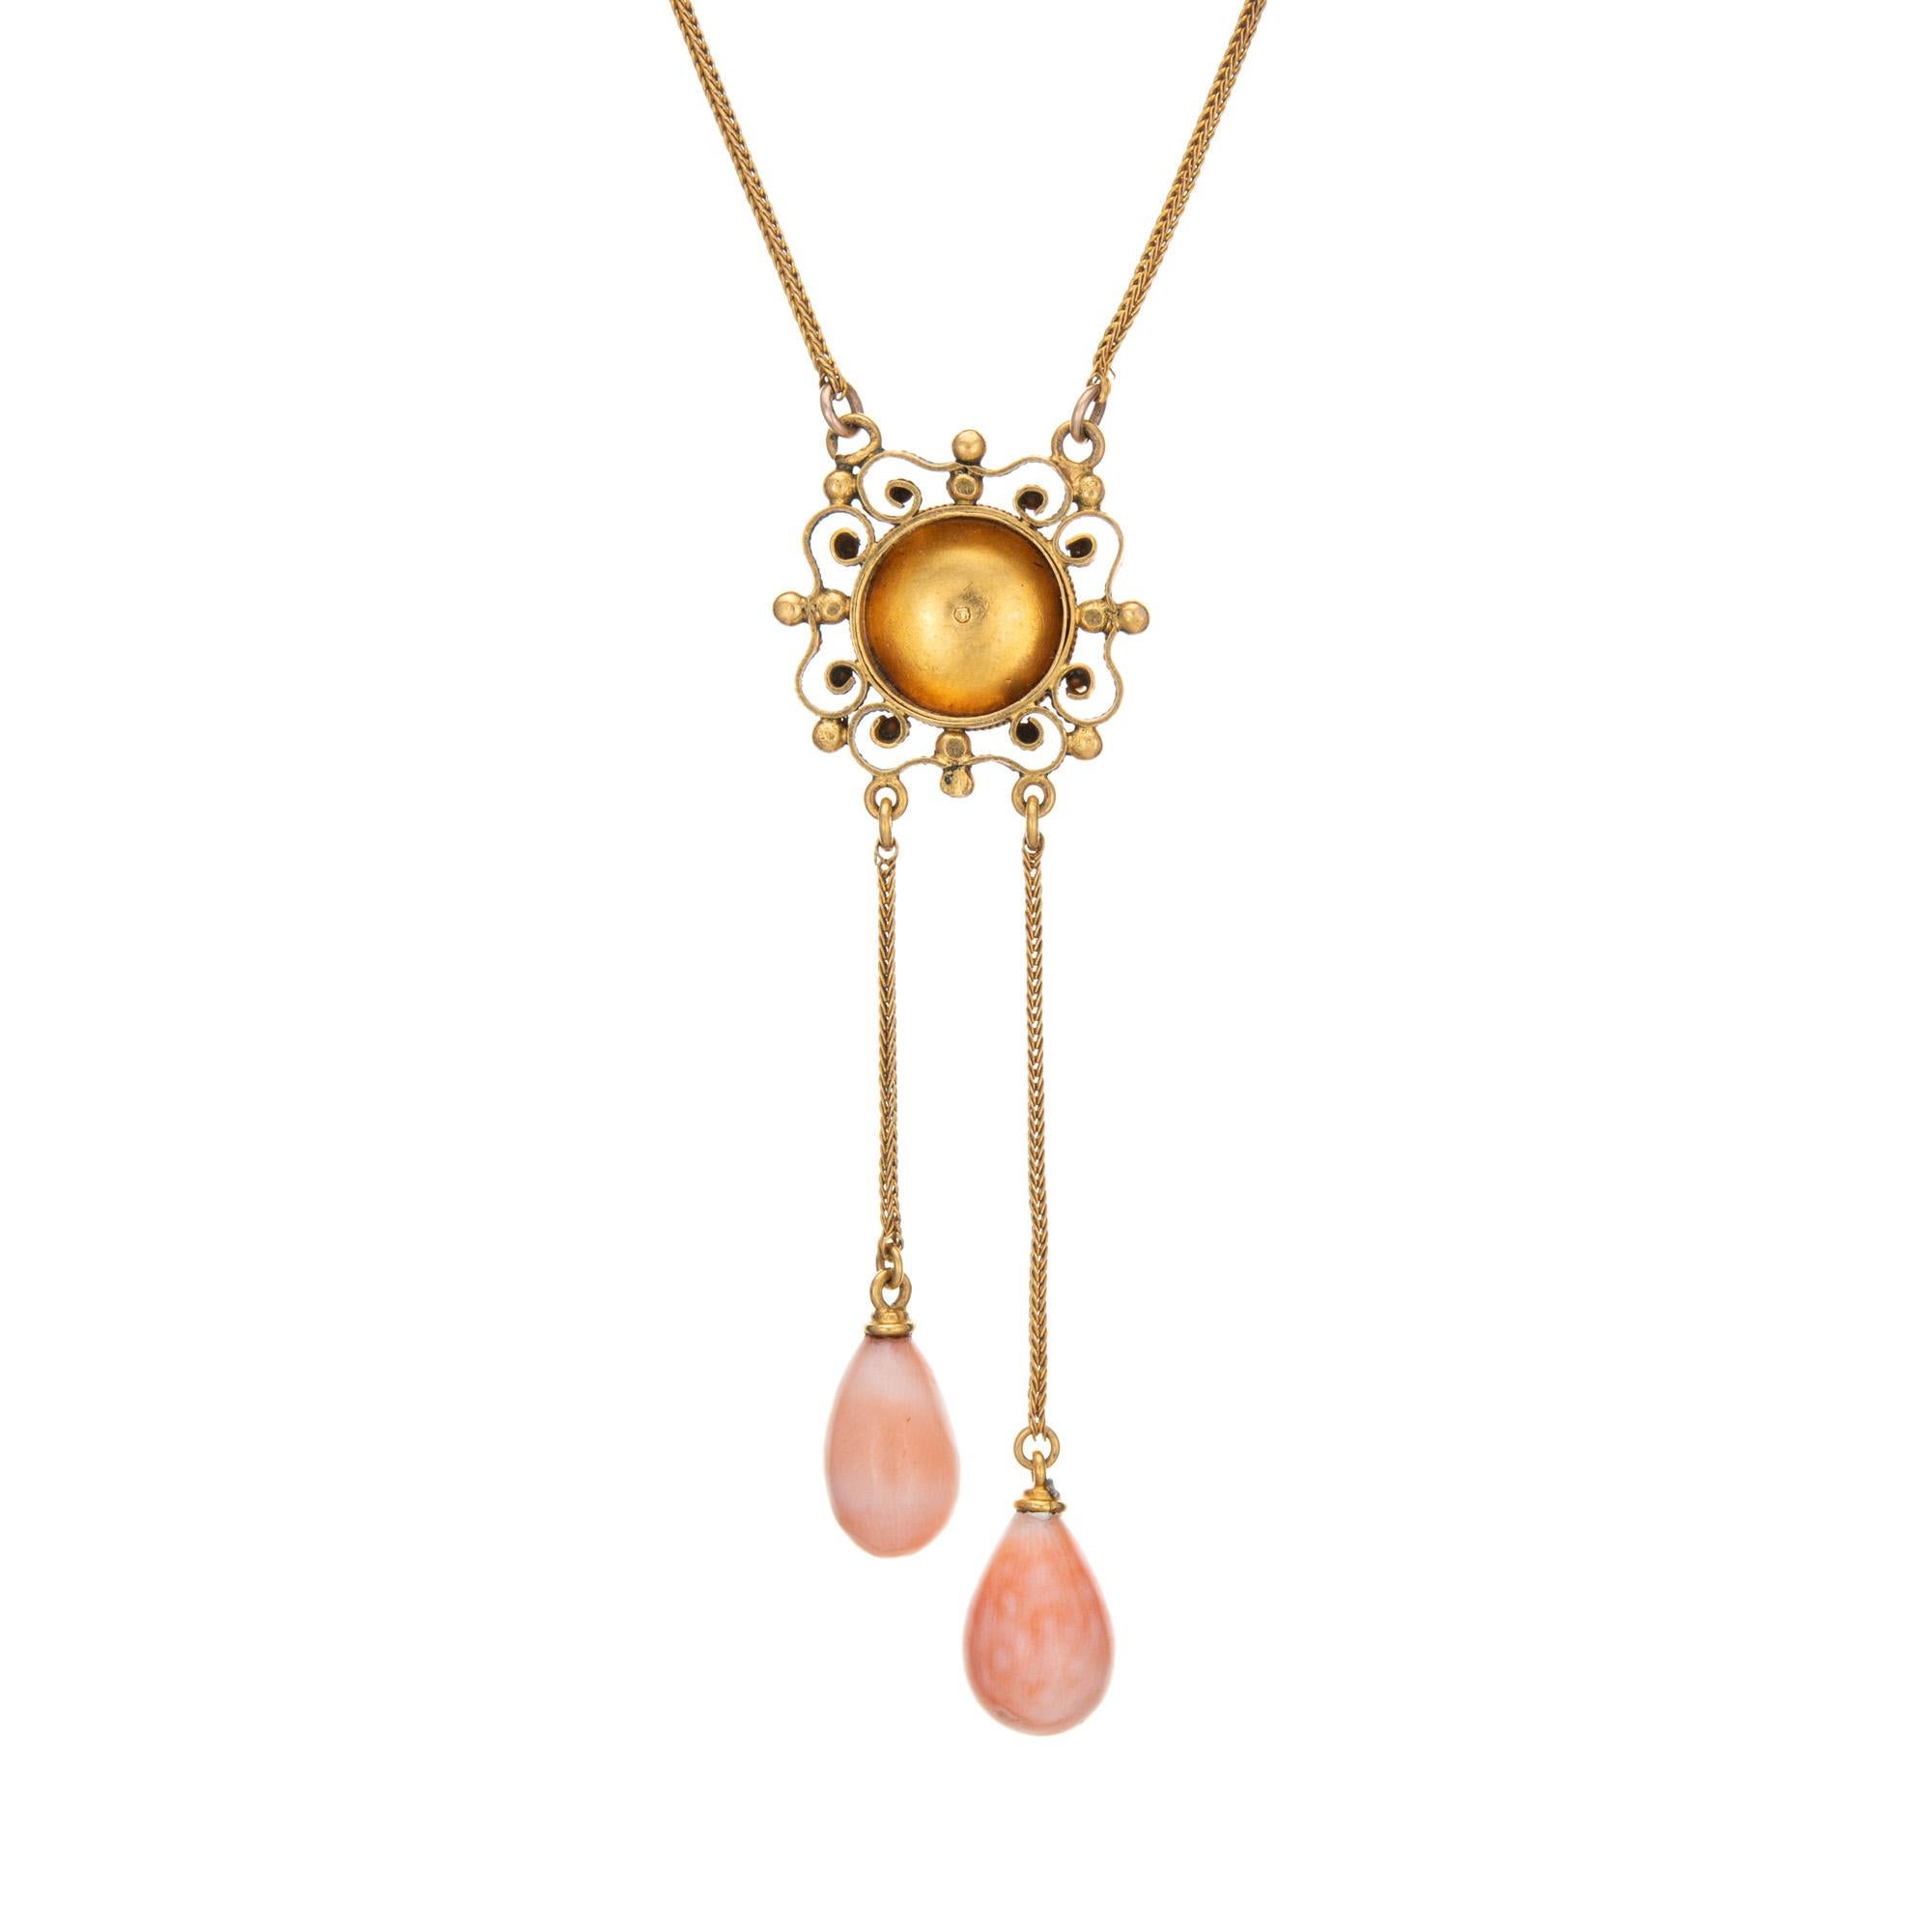 Finely detailed antique Edwardian era negligee drop necklace (circa 1900s to 1910s), crafted in 18k yellow gold. 

The elaborate circular mount is set with 7mm coral, with two coral drops measuring 12mm x 7mm. The coral is in very good condition and